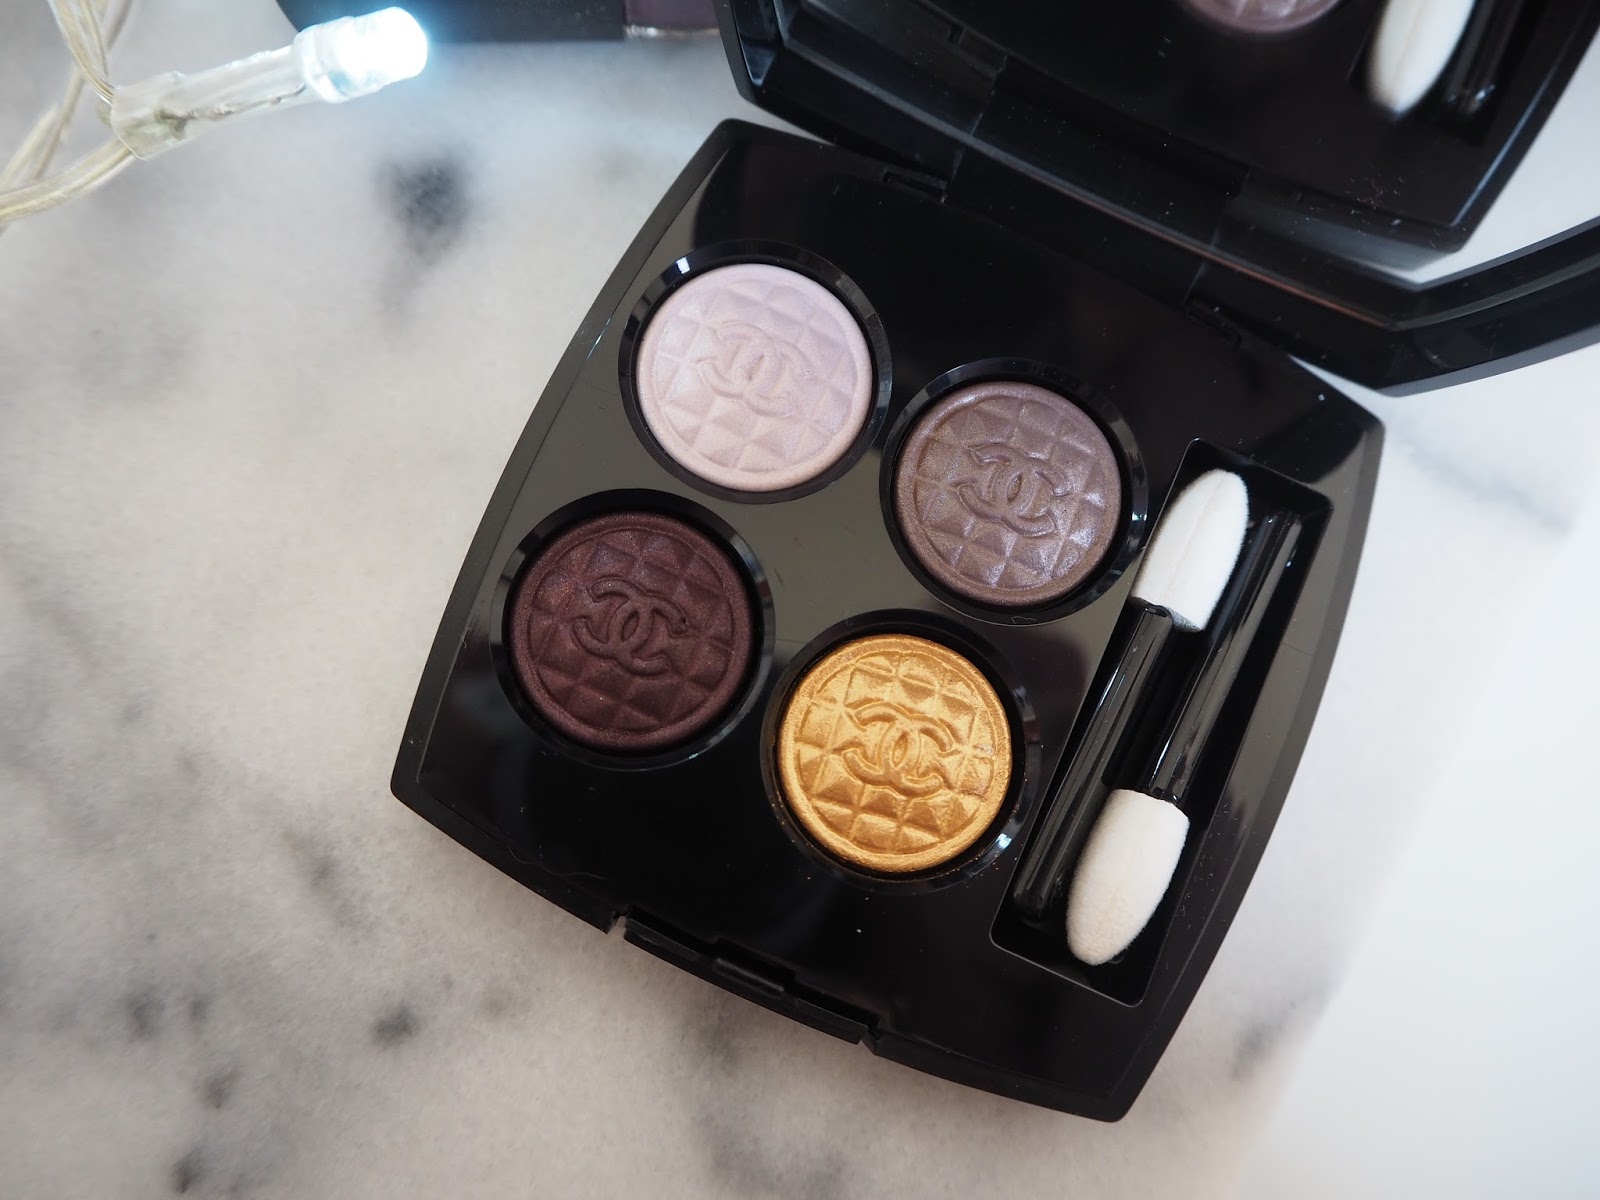 Chanel Holiday 2015 collection